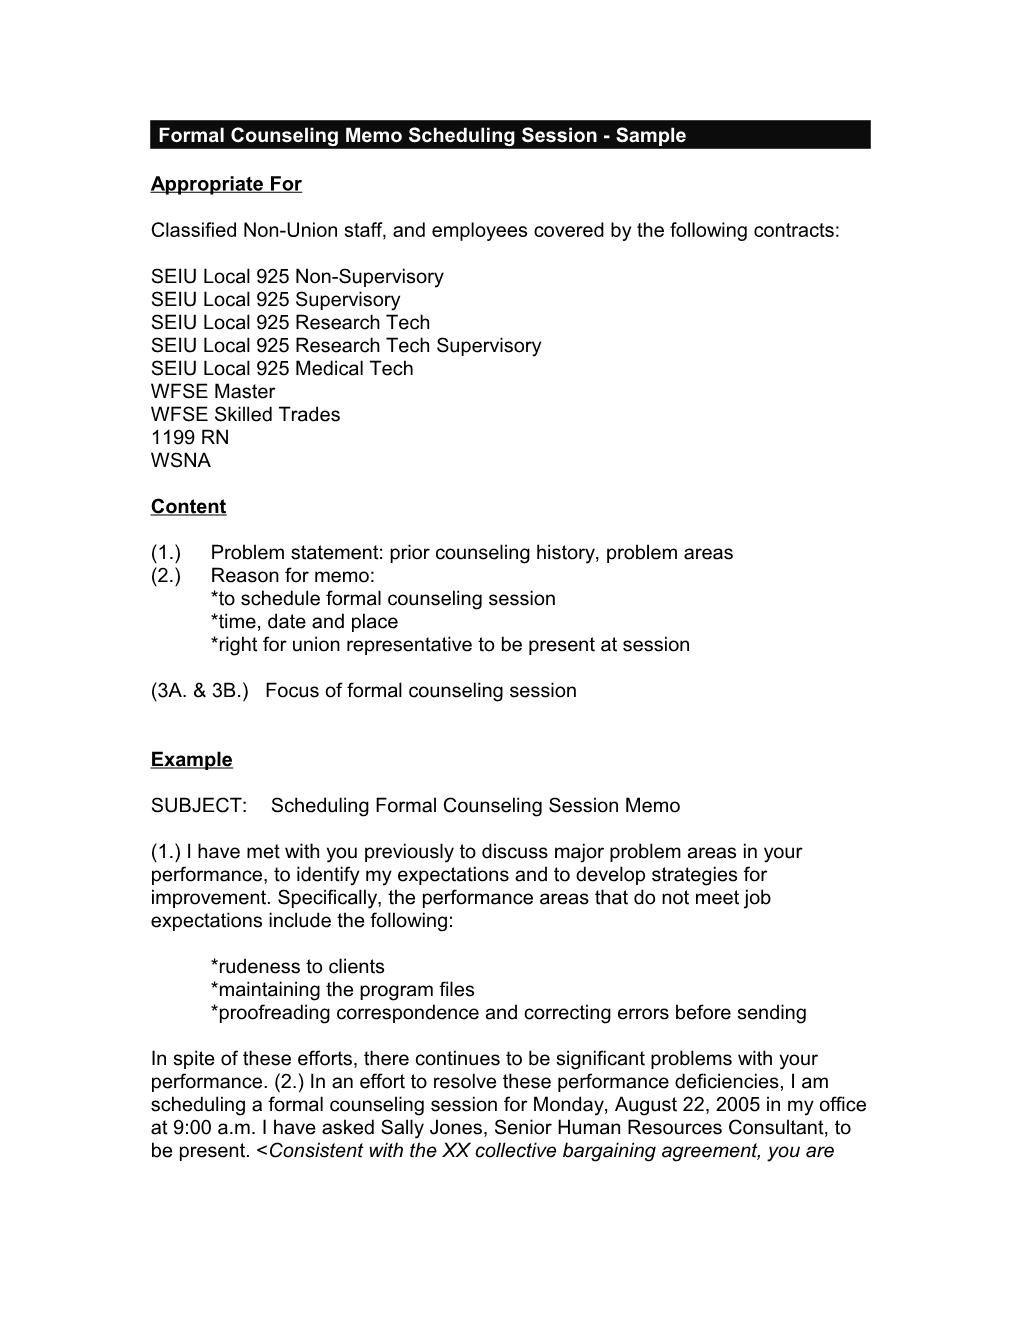 Formal Counseling Memo Scheduling Session - Sample